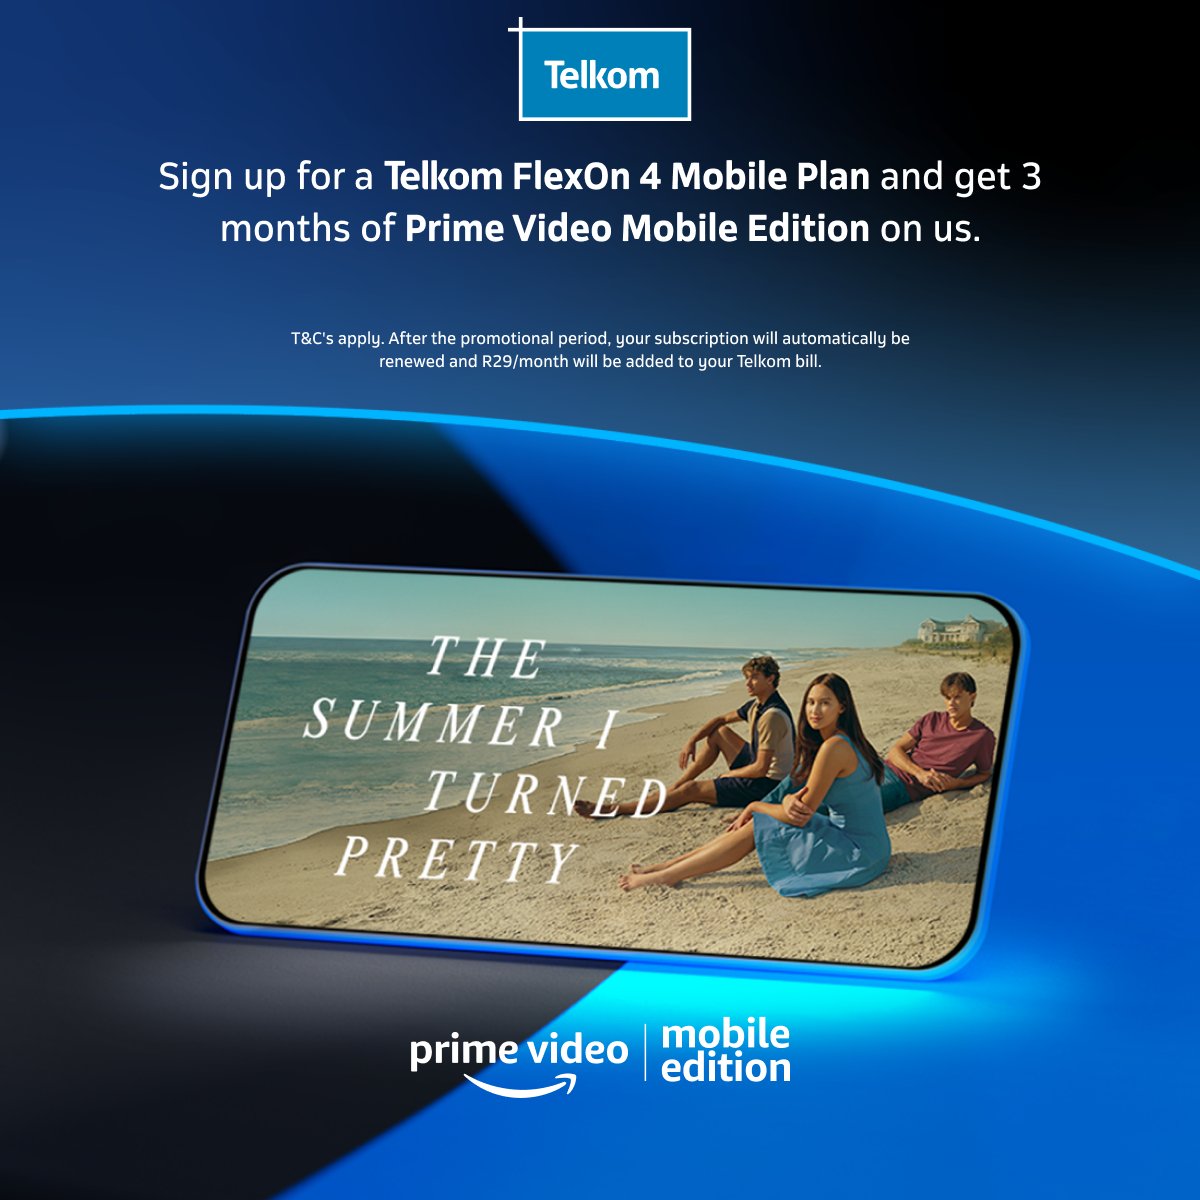 Fall in love with 'The Summer I Turned Pretty' on the Prime Video App. Sign up for Telkom FlexOn 4 and enjoy 3 months of Prime Video Mobile Edition on us! #TelkomxPrimeVideo ​ Get it now: bit.ly/3Uigbty